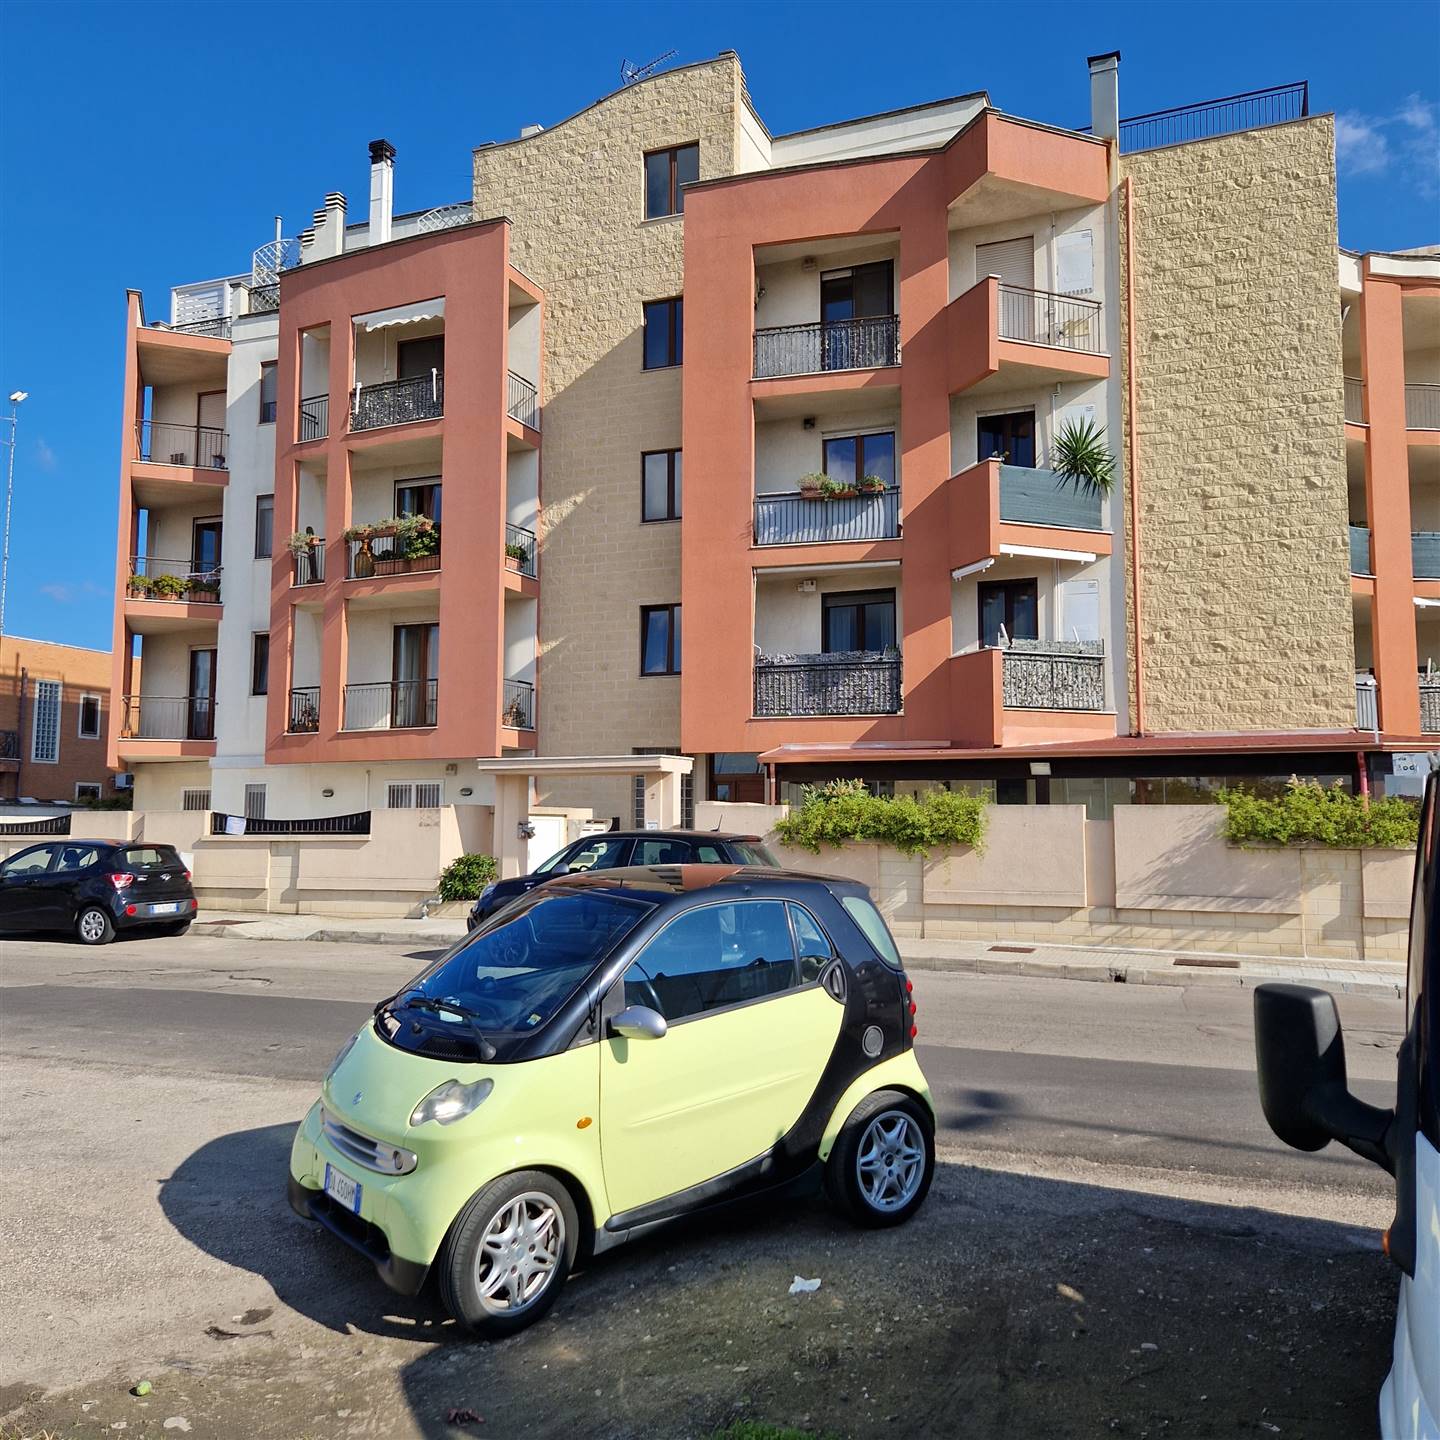 P. PARTIGIANI, LECCE, Apartment for sale of 120 Sq. mt., Habitable, Heating Individual heating system, Energetic class: F, placed at Ground, composed 